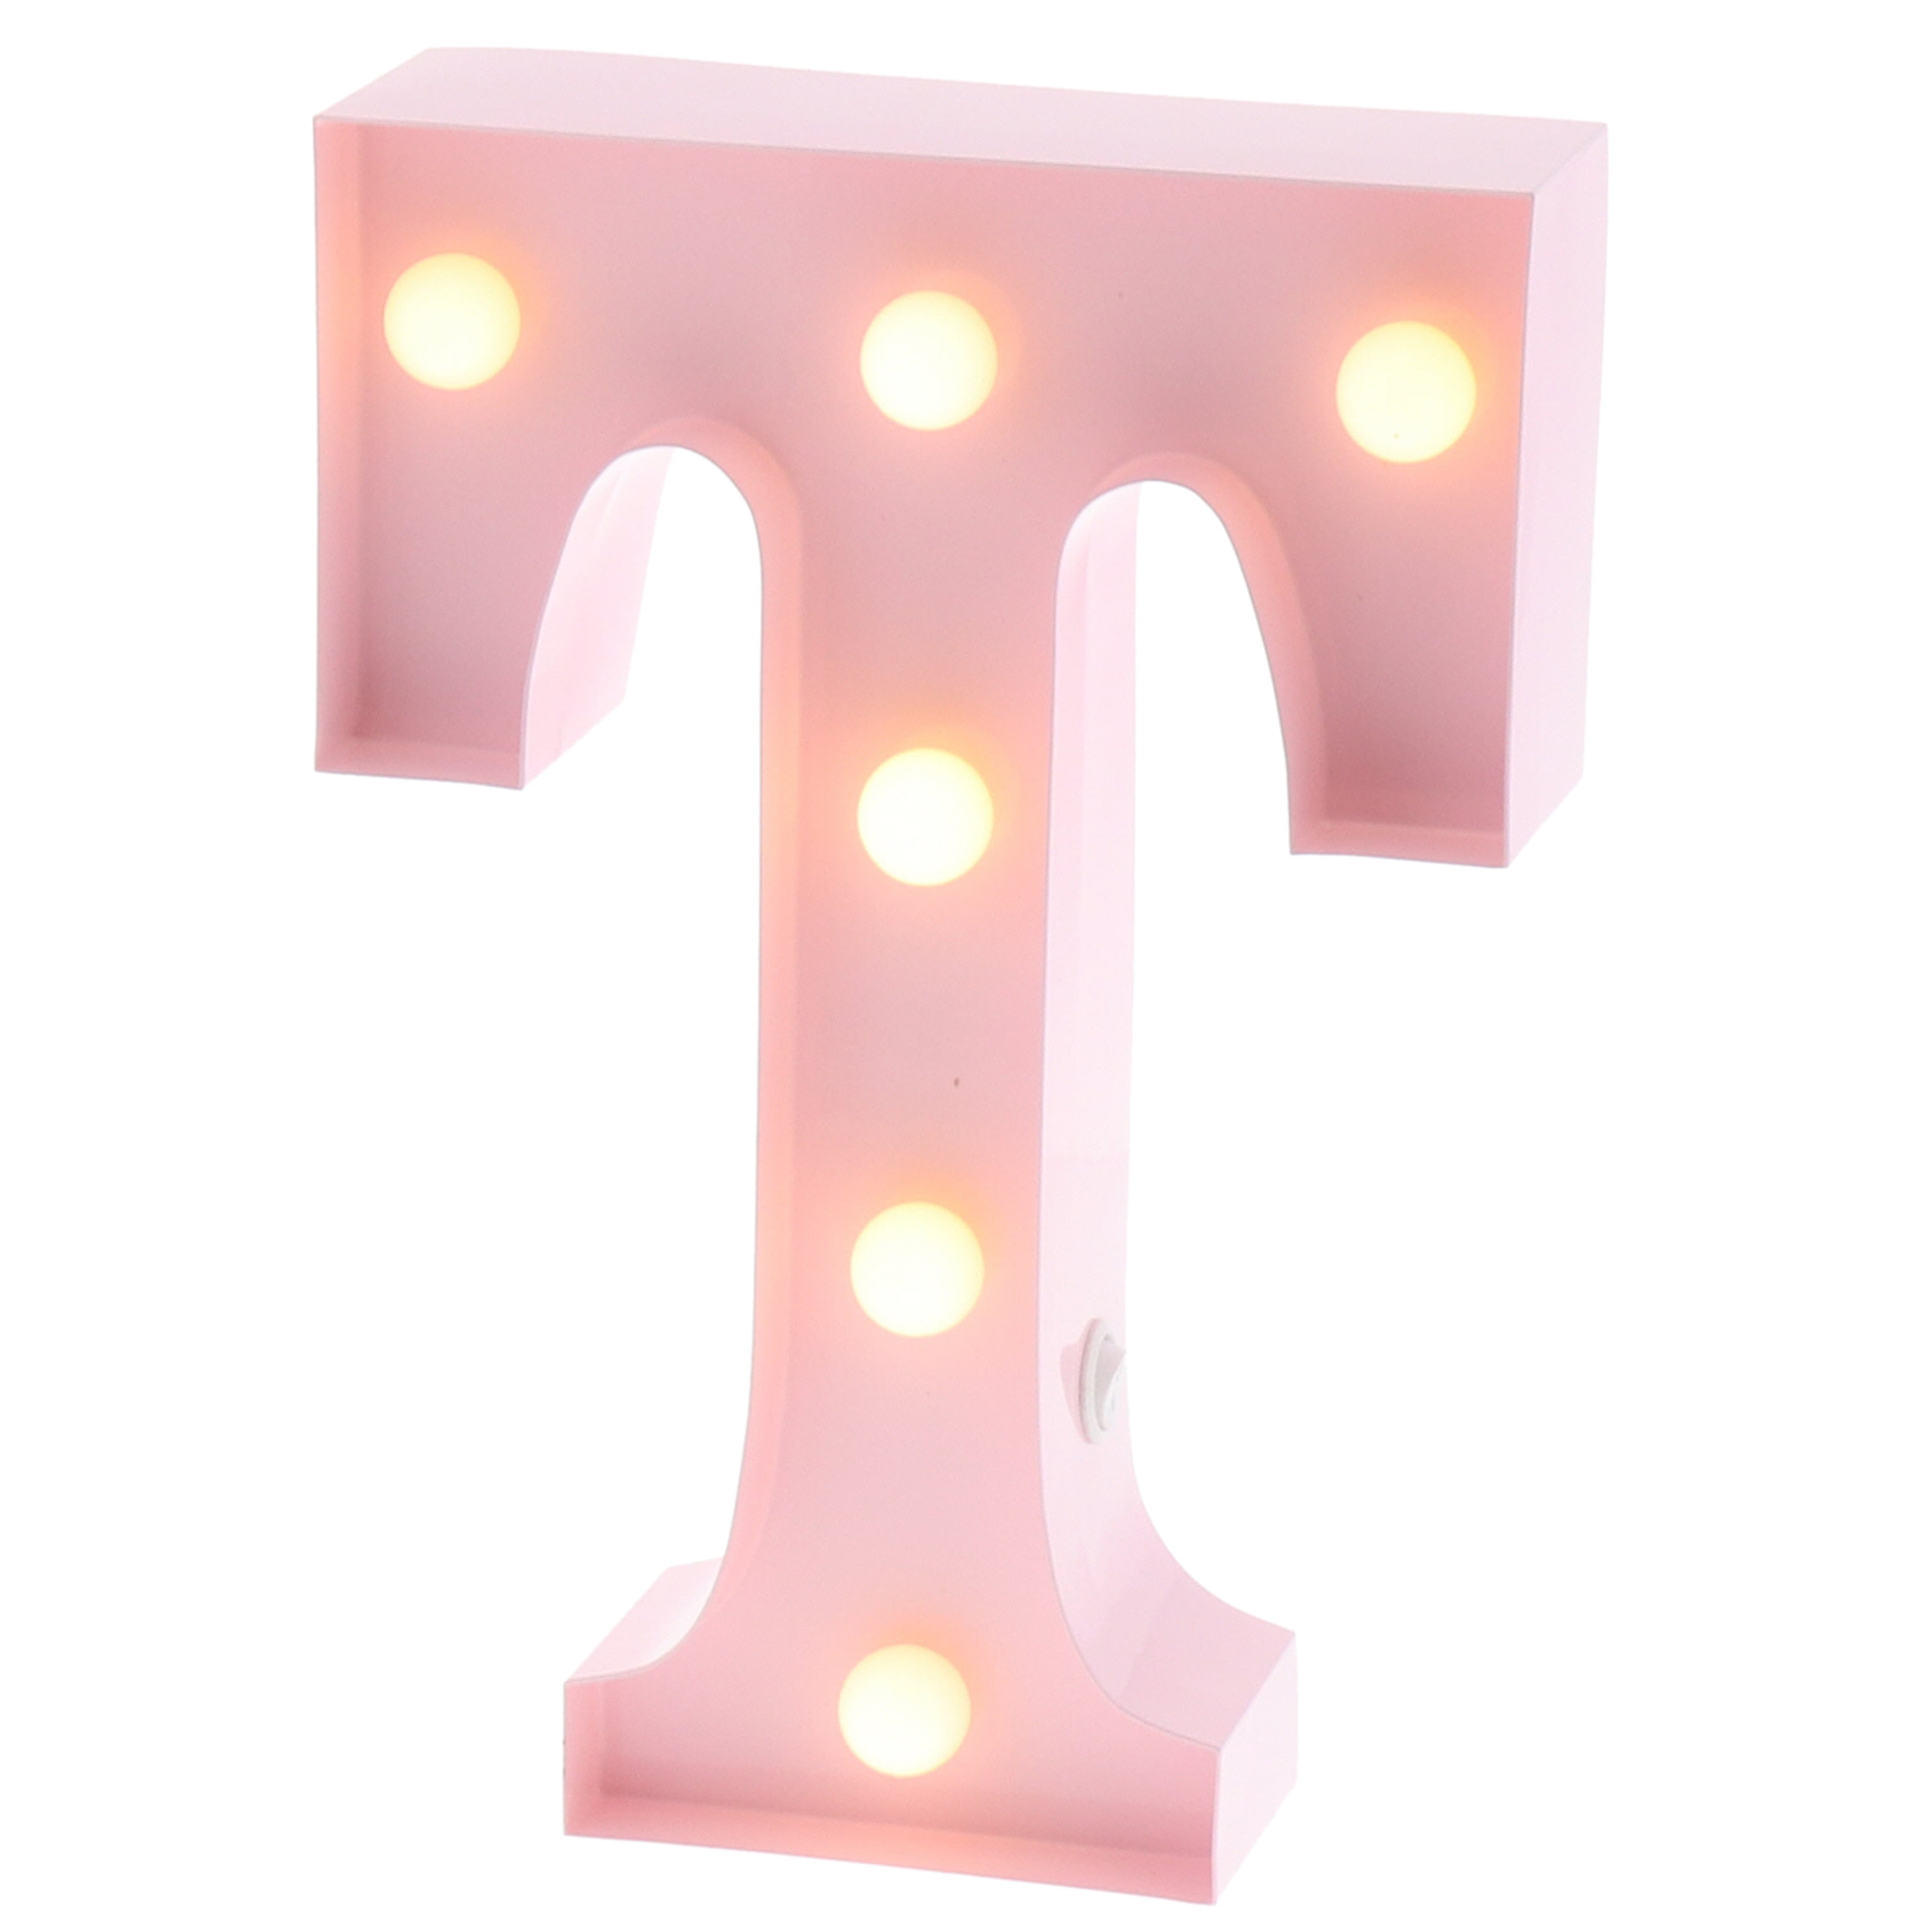 Barnyard Designs Metal Marquee Letter P Light Up Wall Initial Nursery Letter Home and Event Decoration 9” Baby Pink 